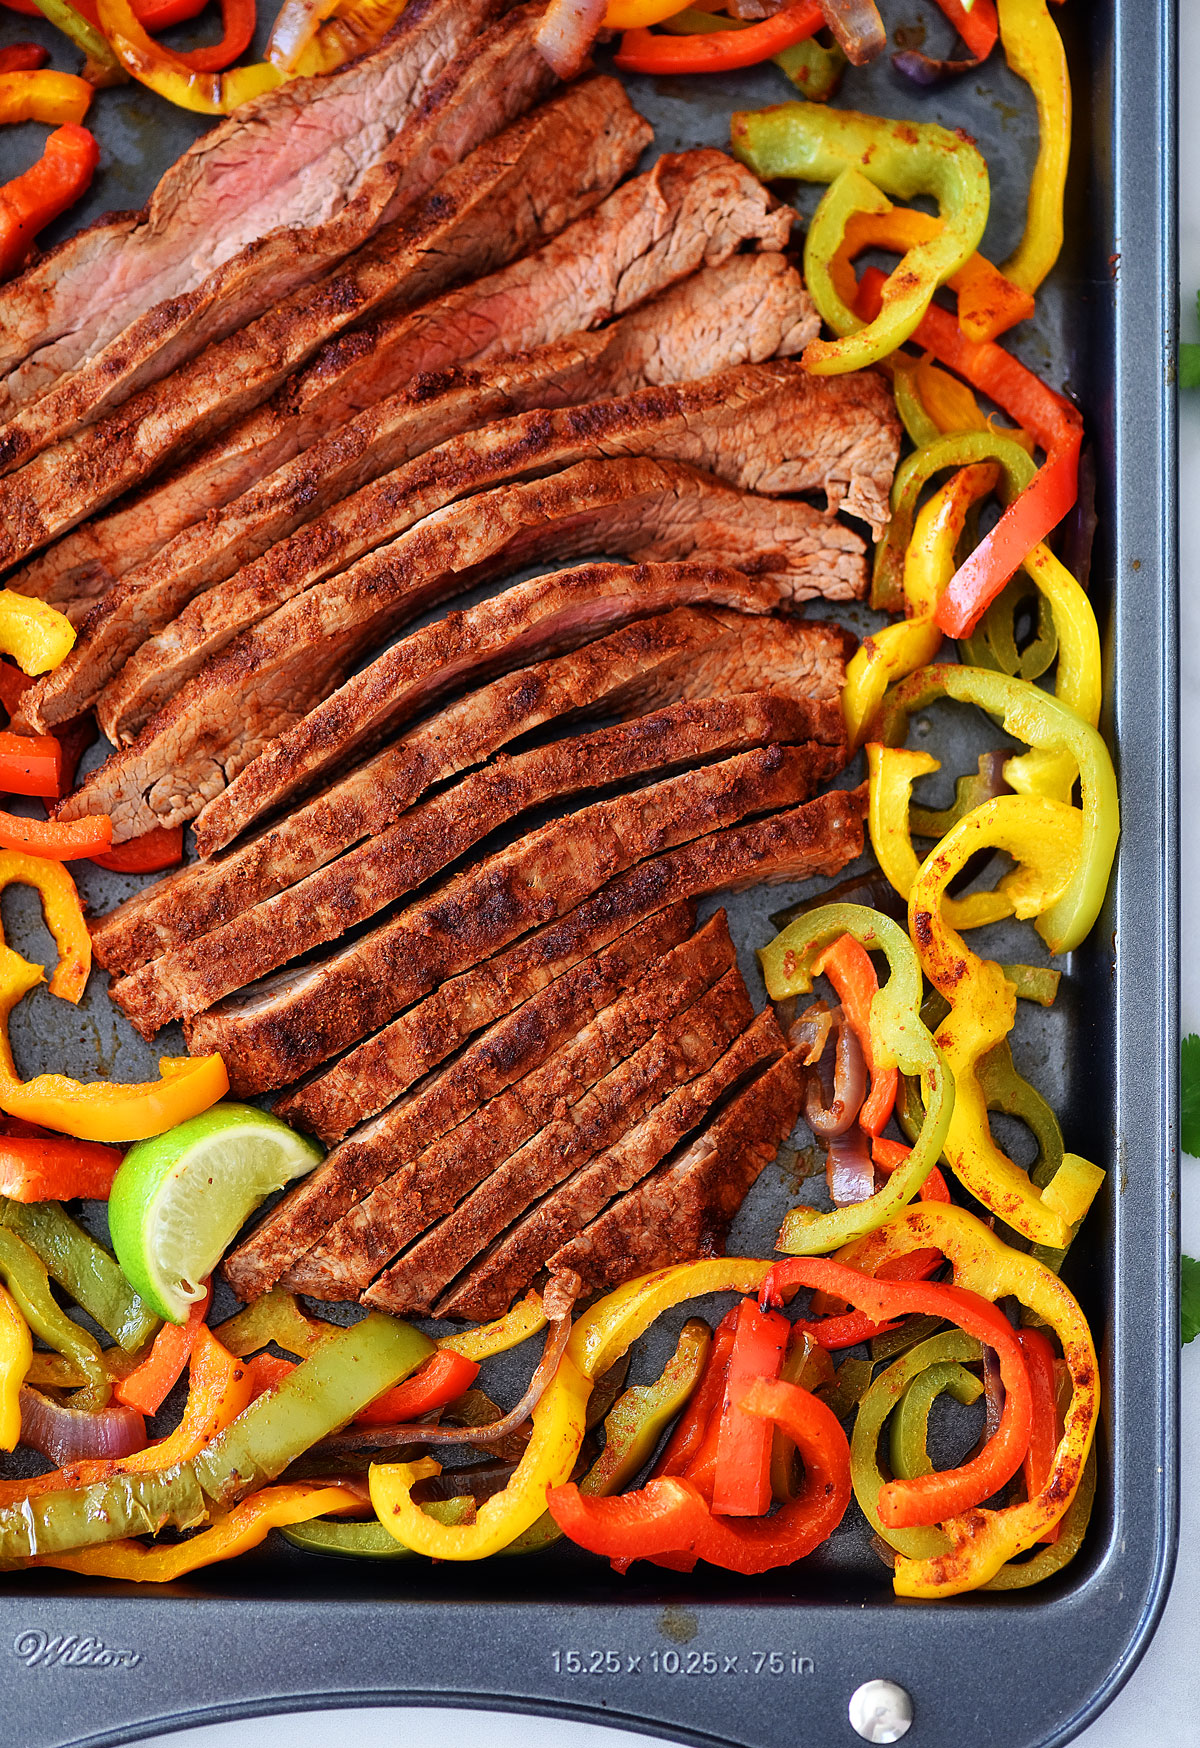 Sheet Pan Steak Fajitas are just like classic fajitas with grilled onions, bell peppers and steak. Life-in-the-Lofthouse.com